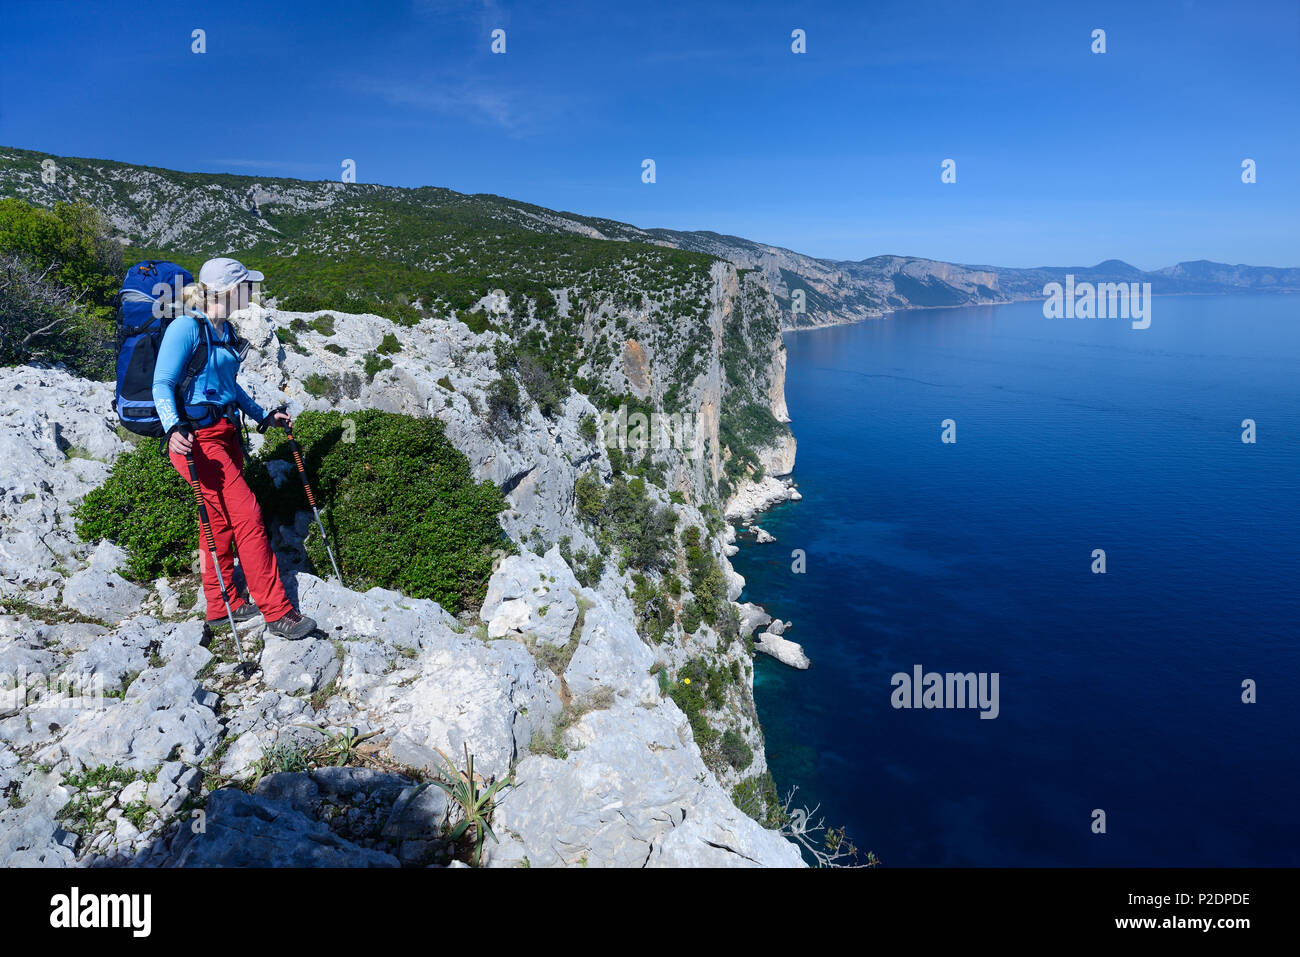 A young woman with trekking gear hiking along the mountainous coast above the sea, Selvaggio Blu, Sardinia, Italy, Europe Stock Photo